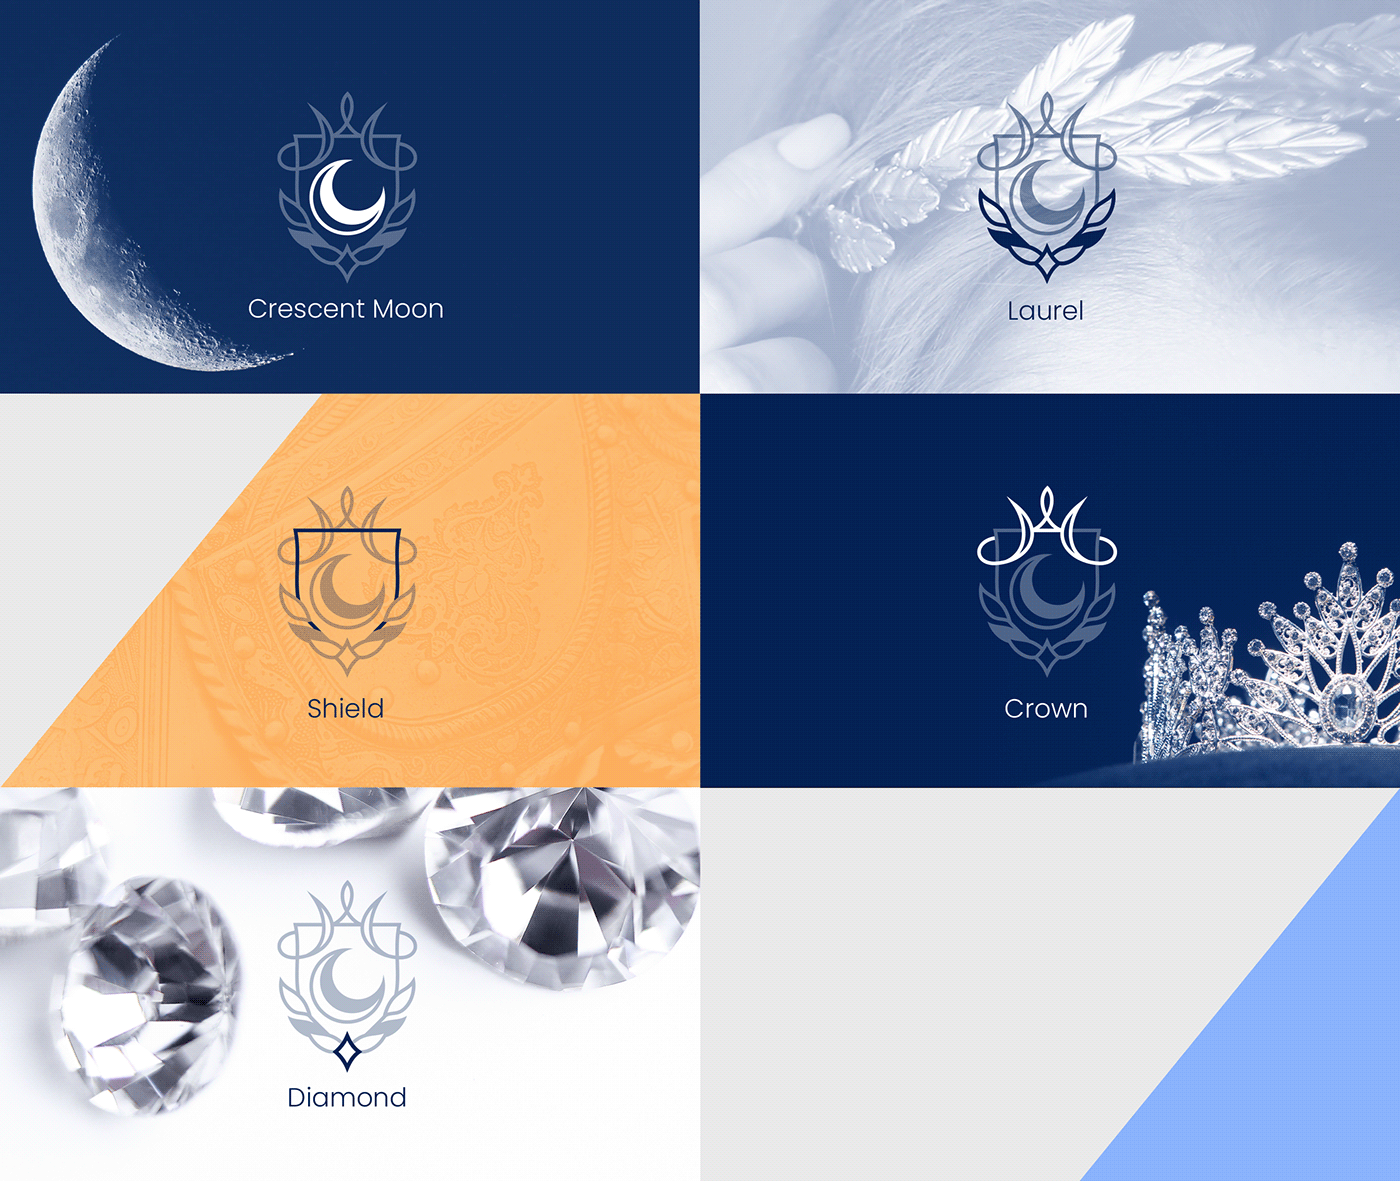 Crescent Head Capital logo concepts over their inspirational images